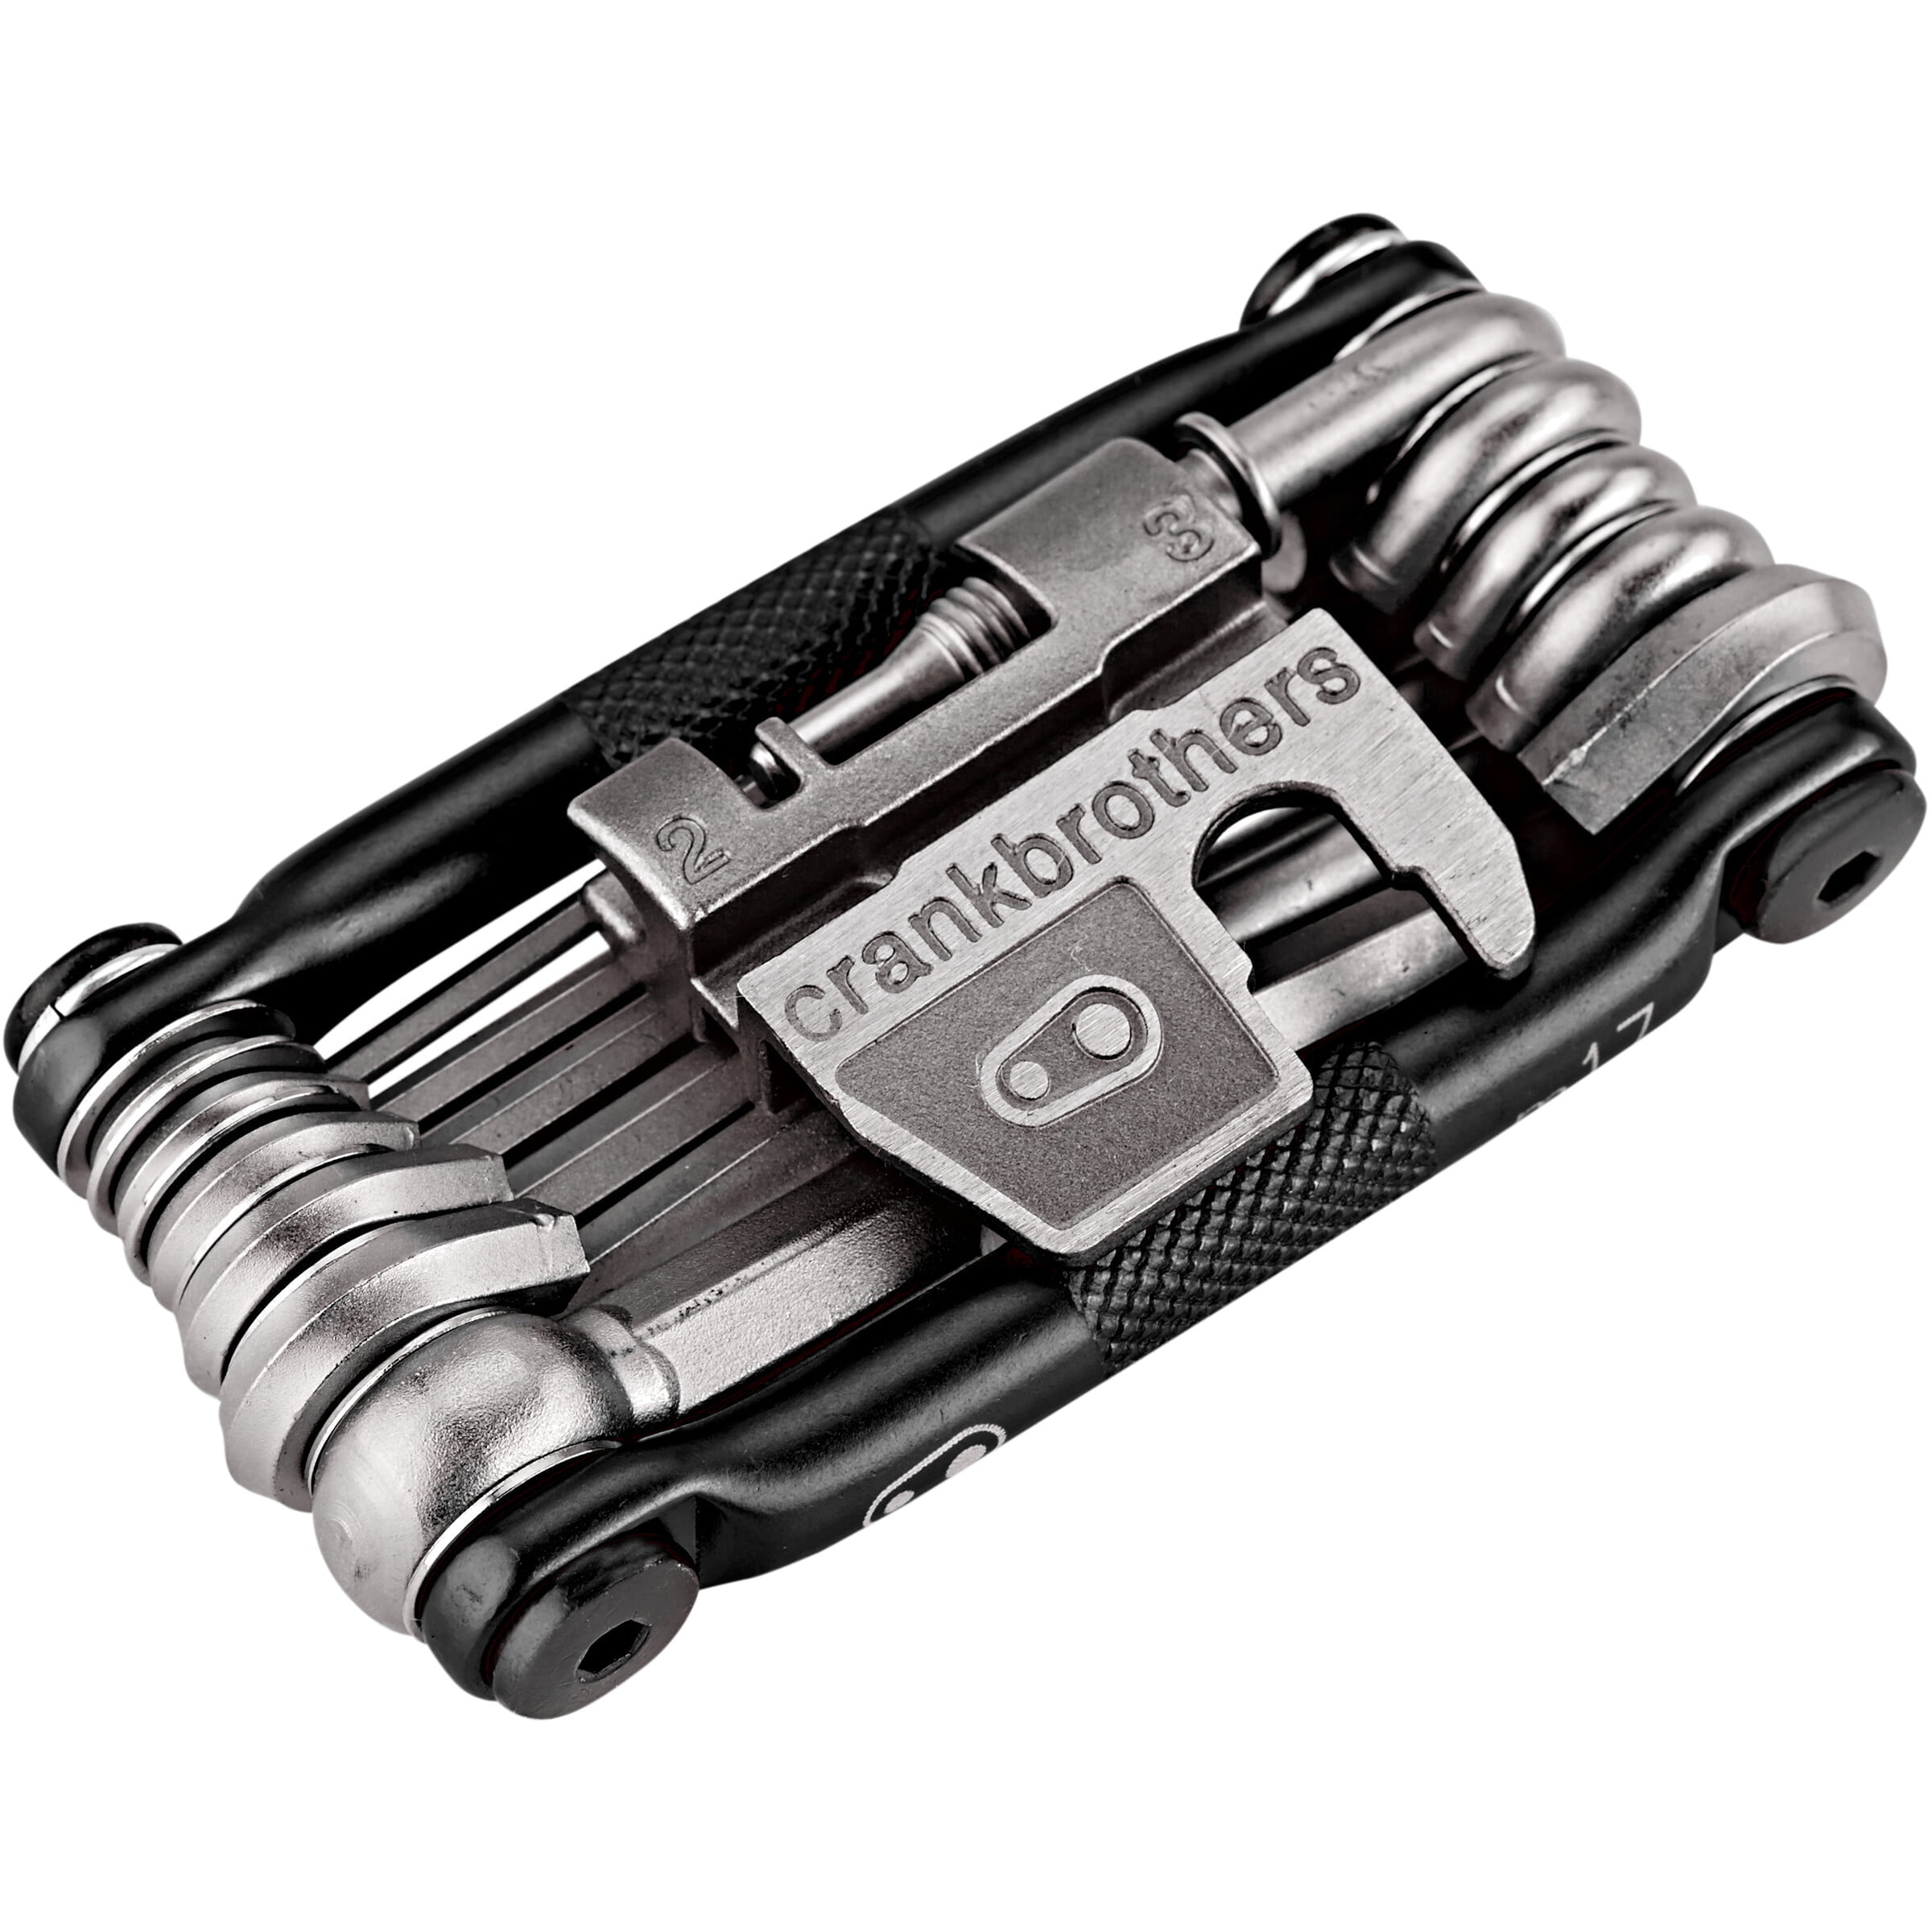 CRANKBROTHERS Multi-tool M17 featured imge